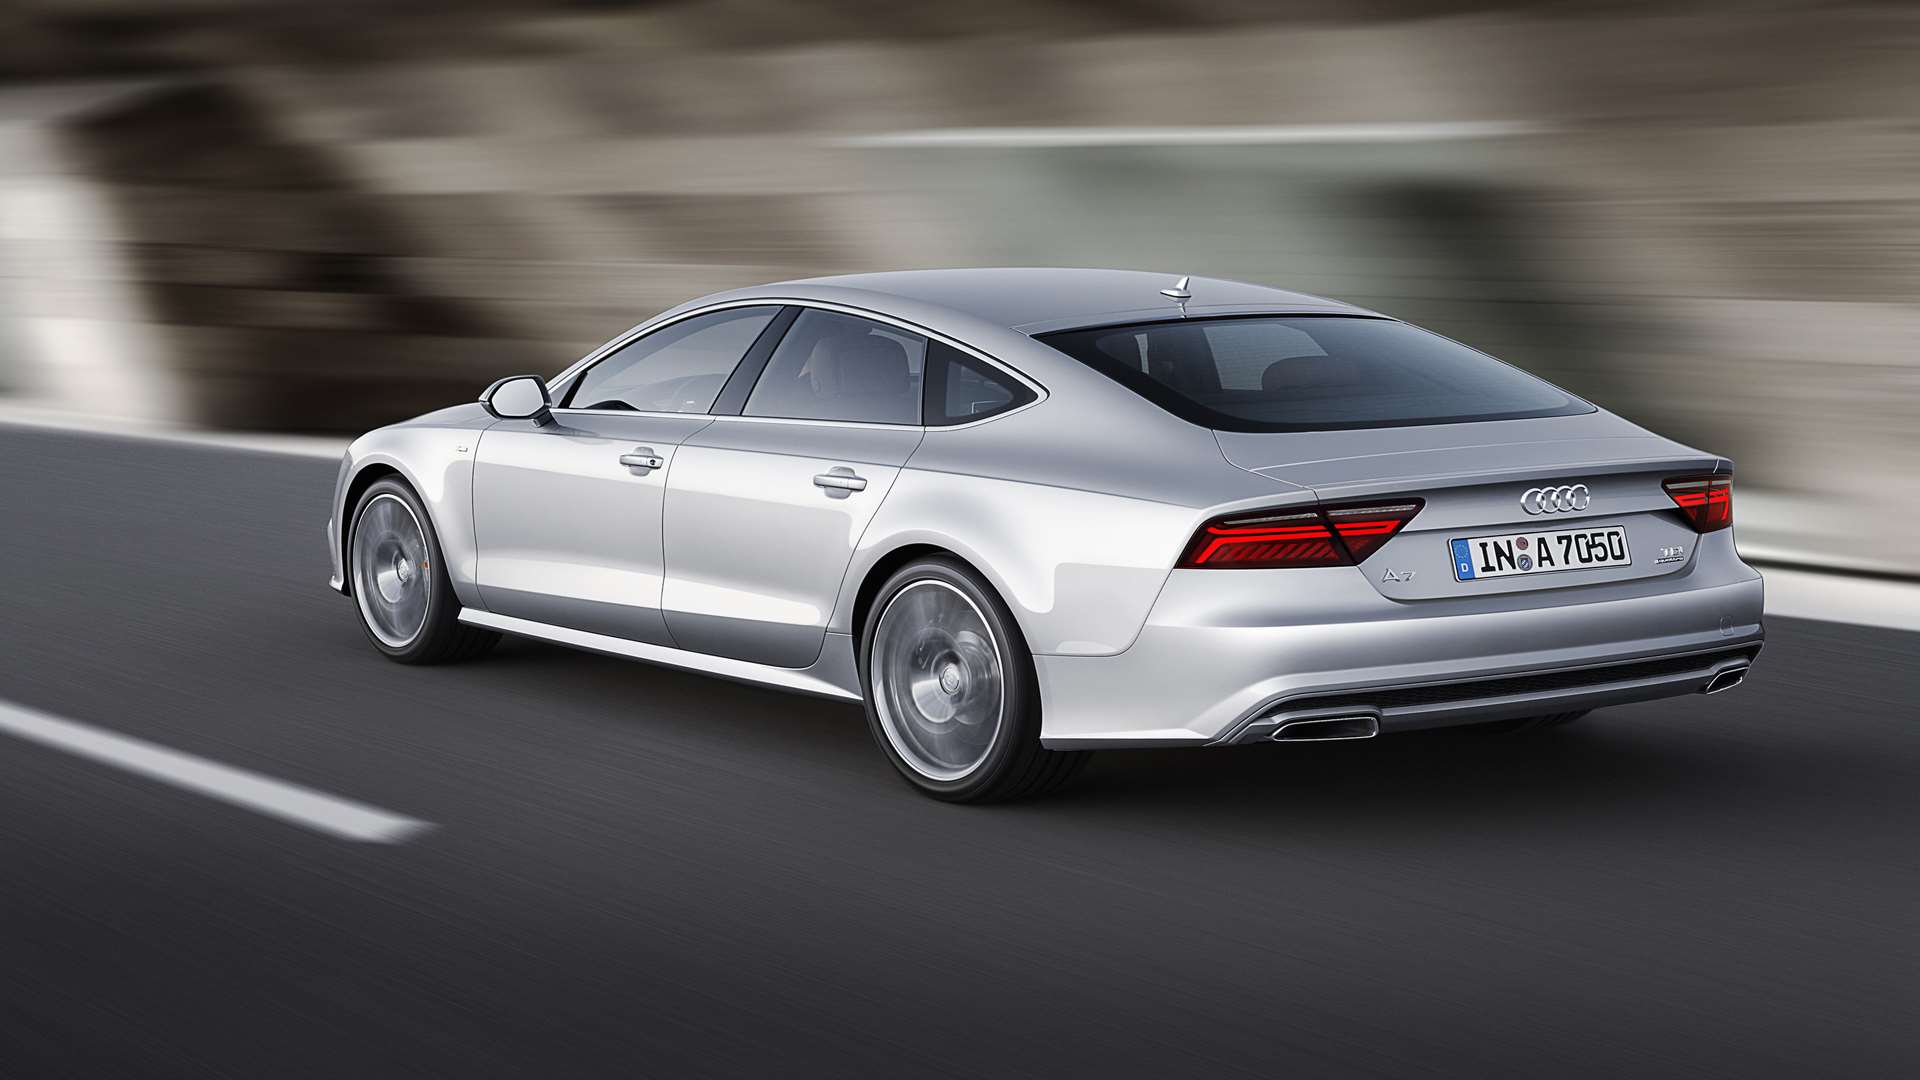 The A7's styling is coupe-like